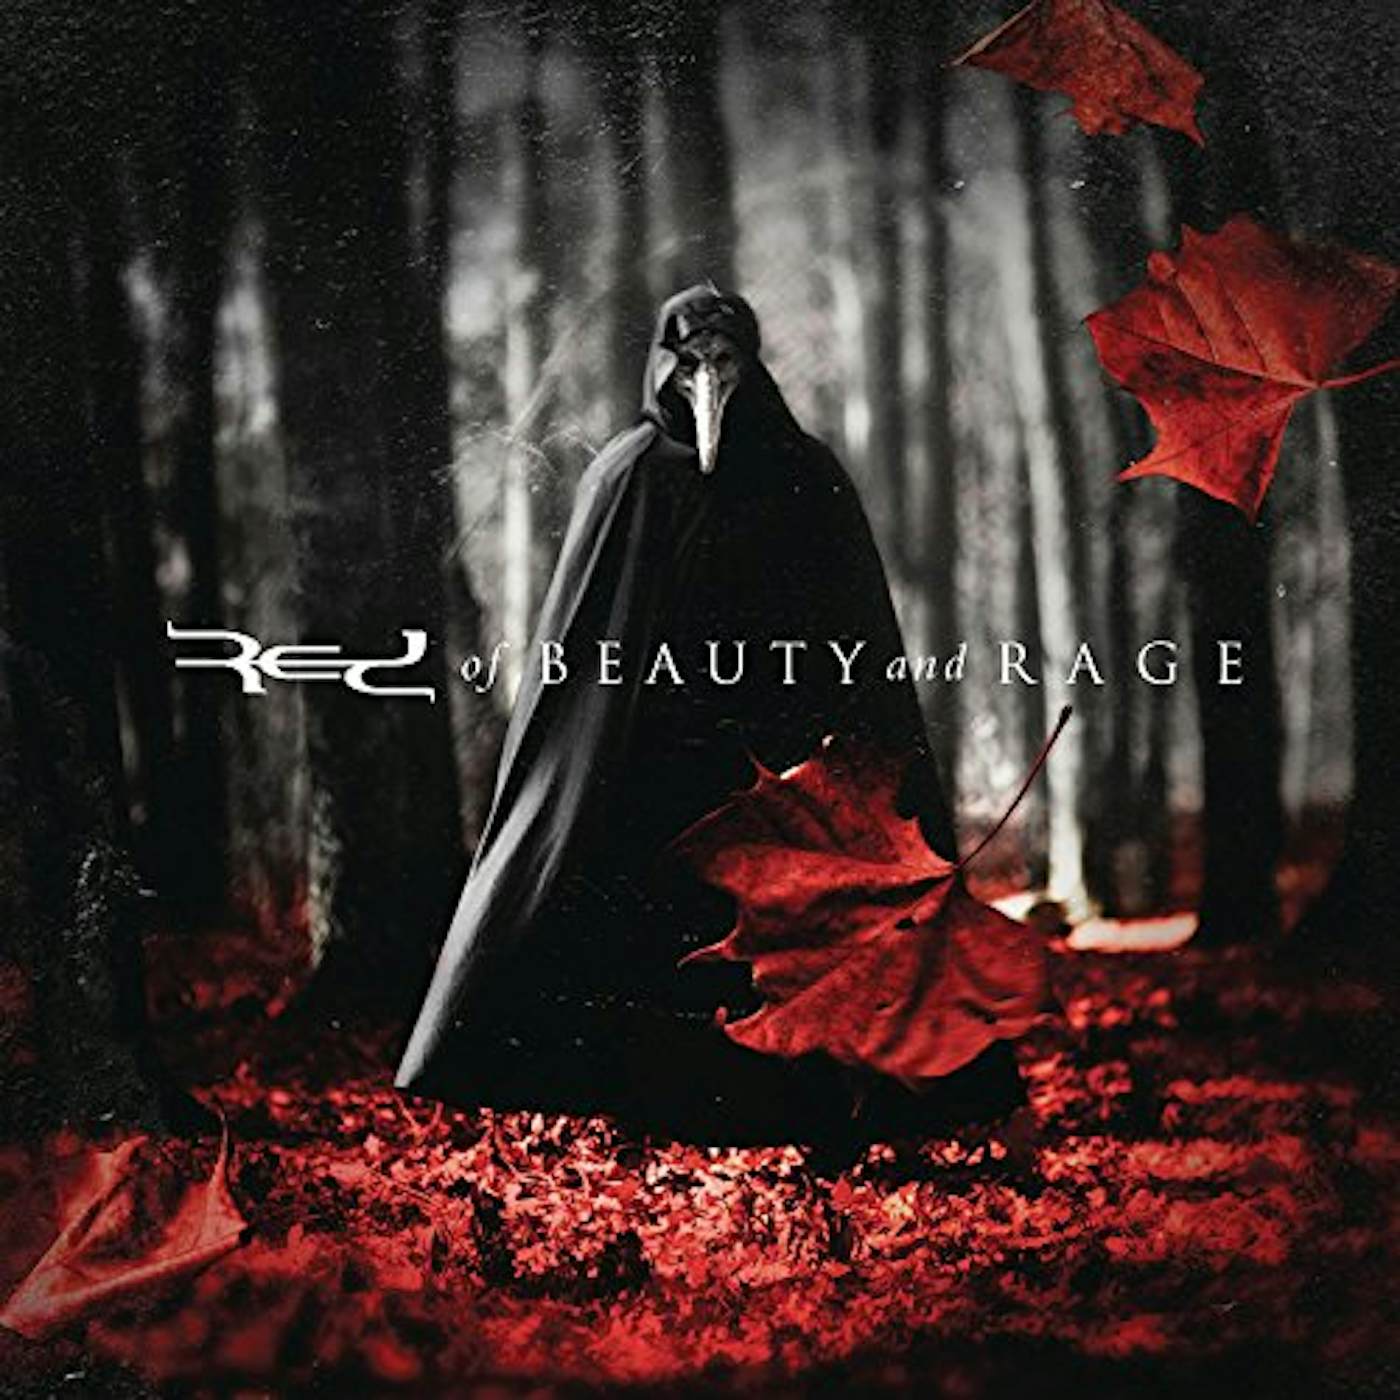 Red OF BEAUTY & RAGE CD